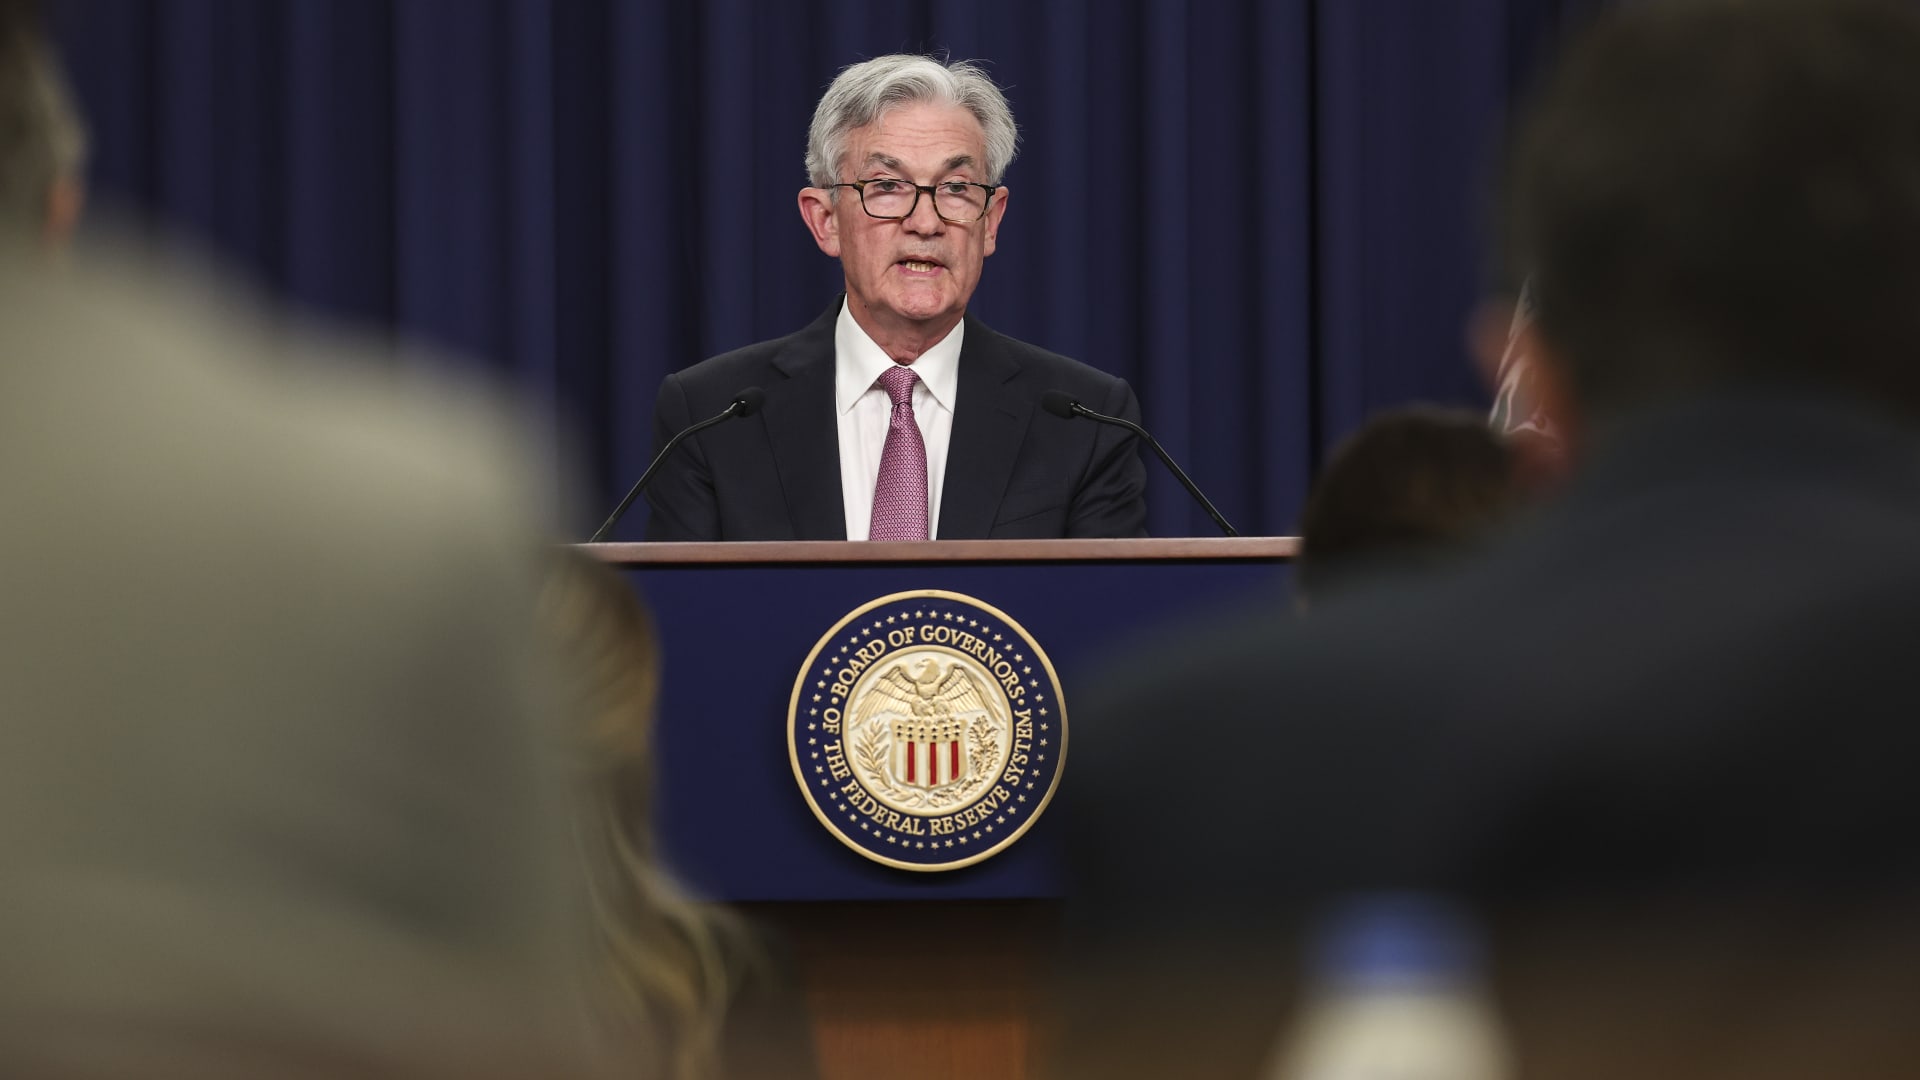 Federal Reserve Chairman Jerome Powell confirmed by Senate for a second term